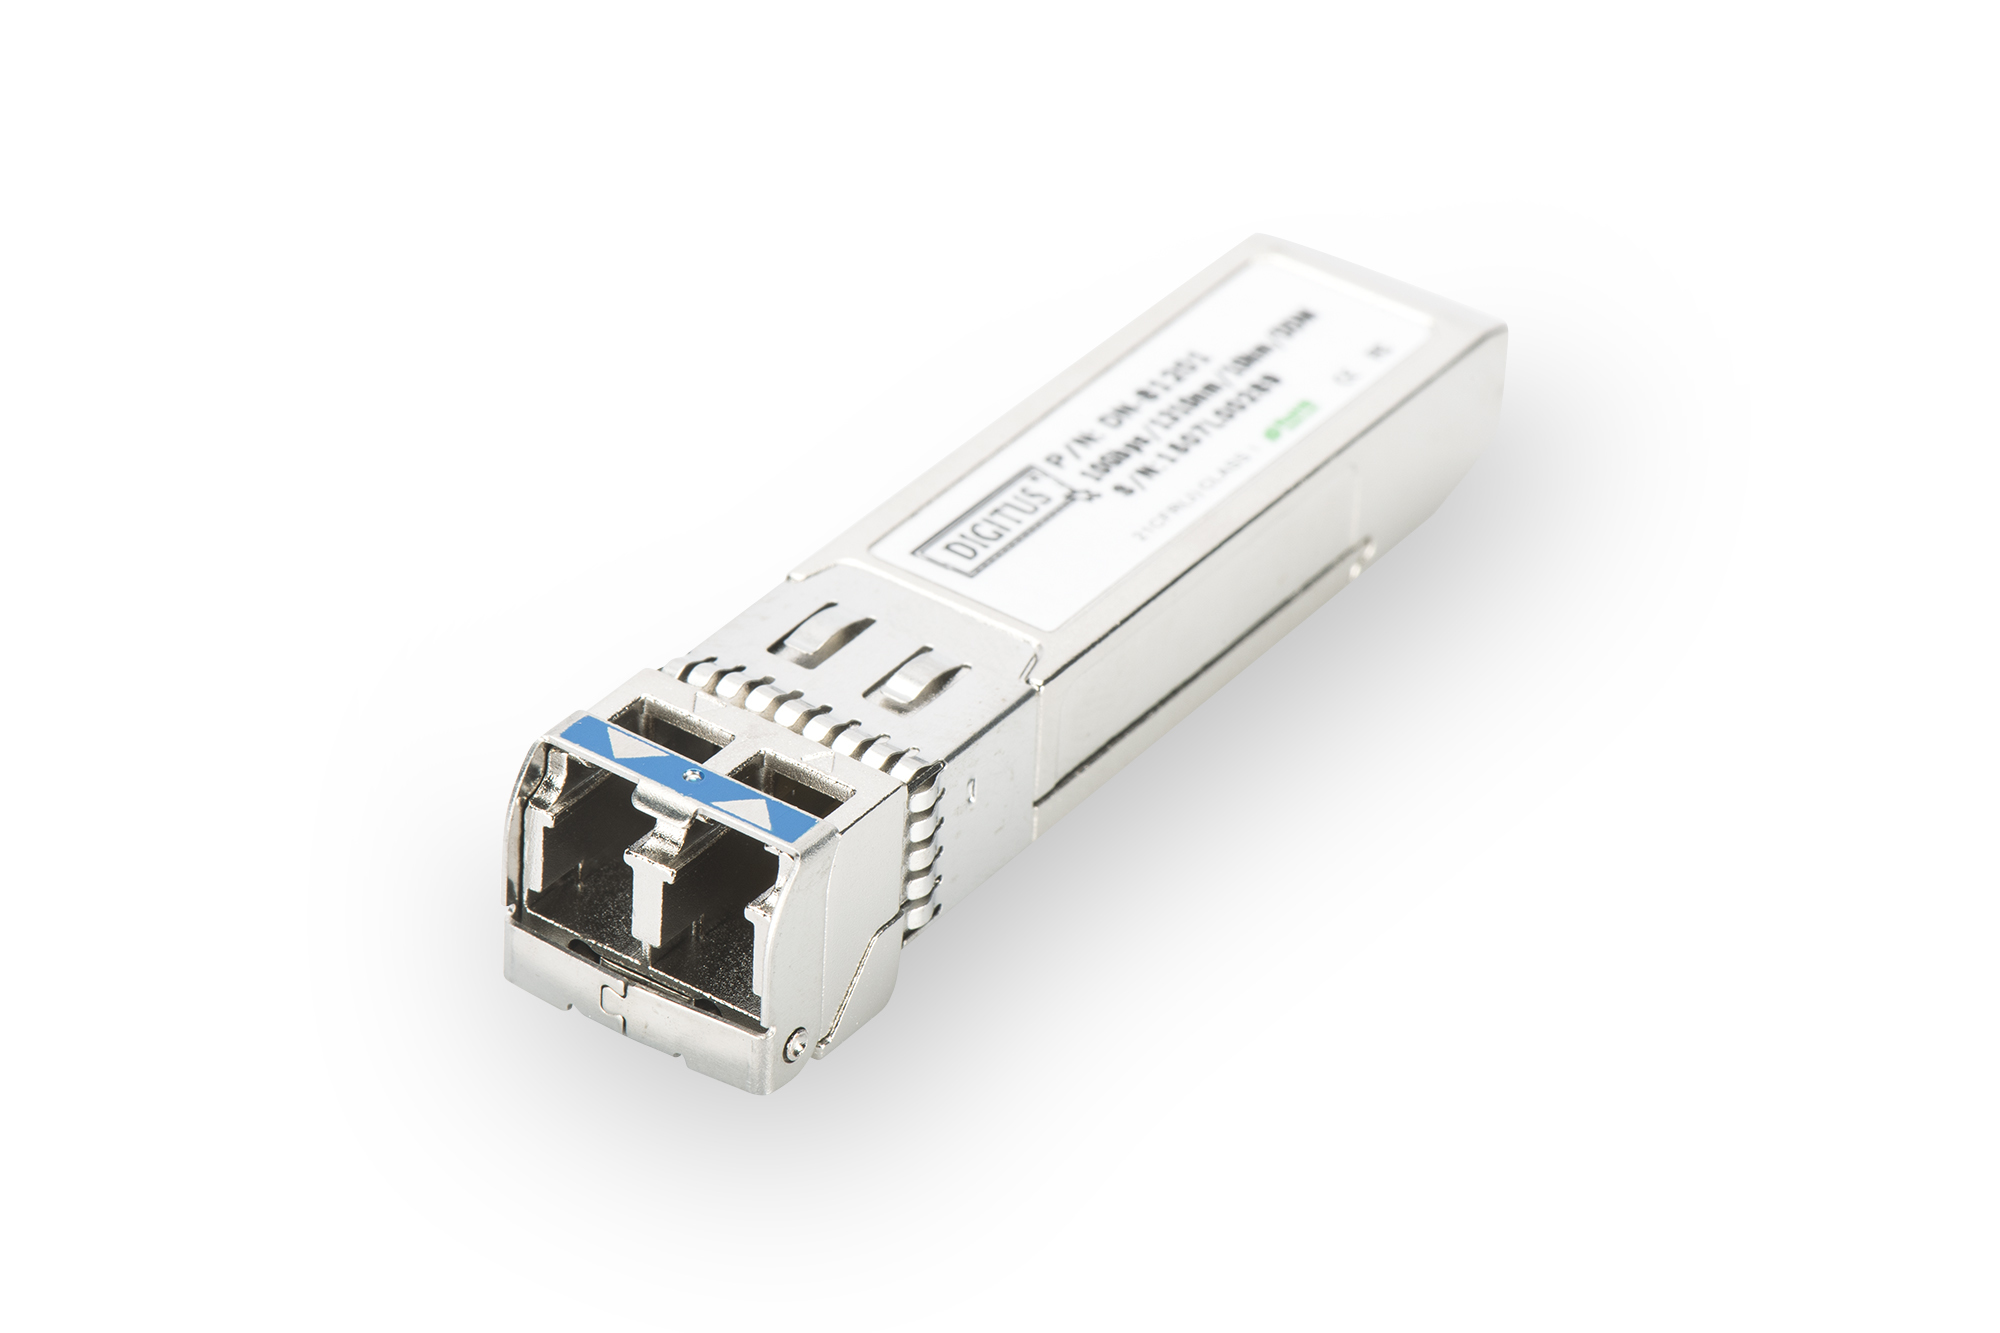 Photos - SFP Transceiver Digitus mini GBIC  Module, 10Gbps, 10.0km, with DDM Feature DN-81201 (SFP)